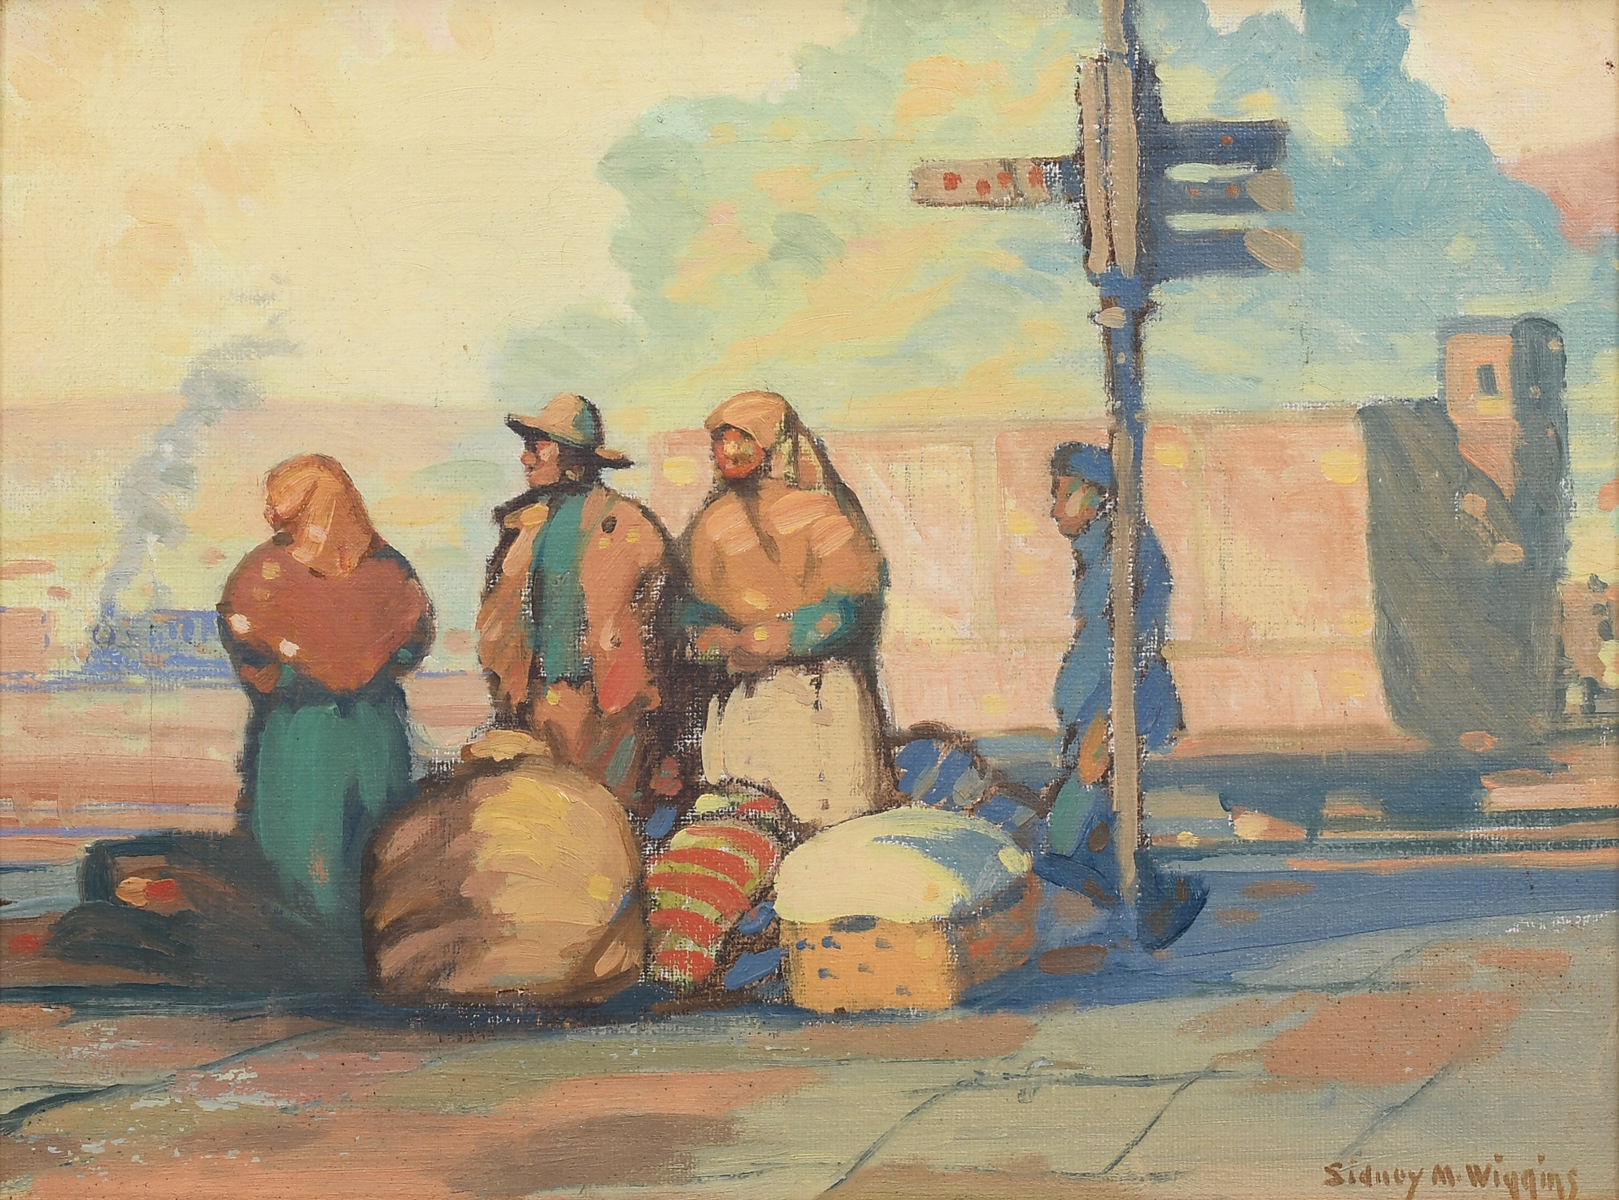 Native Americans Waiting for the Train - Sidney Miller Wiggins